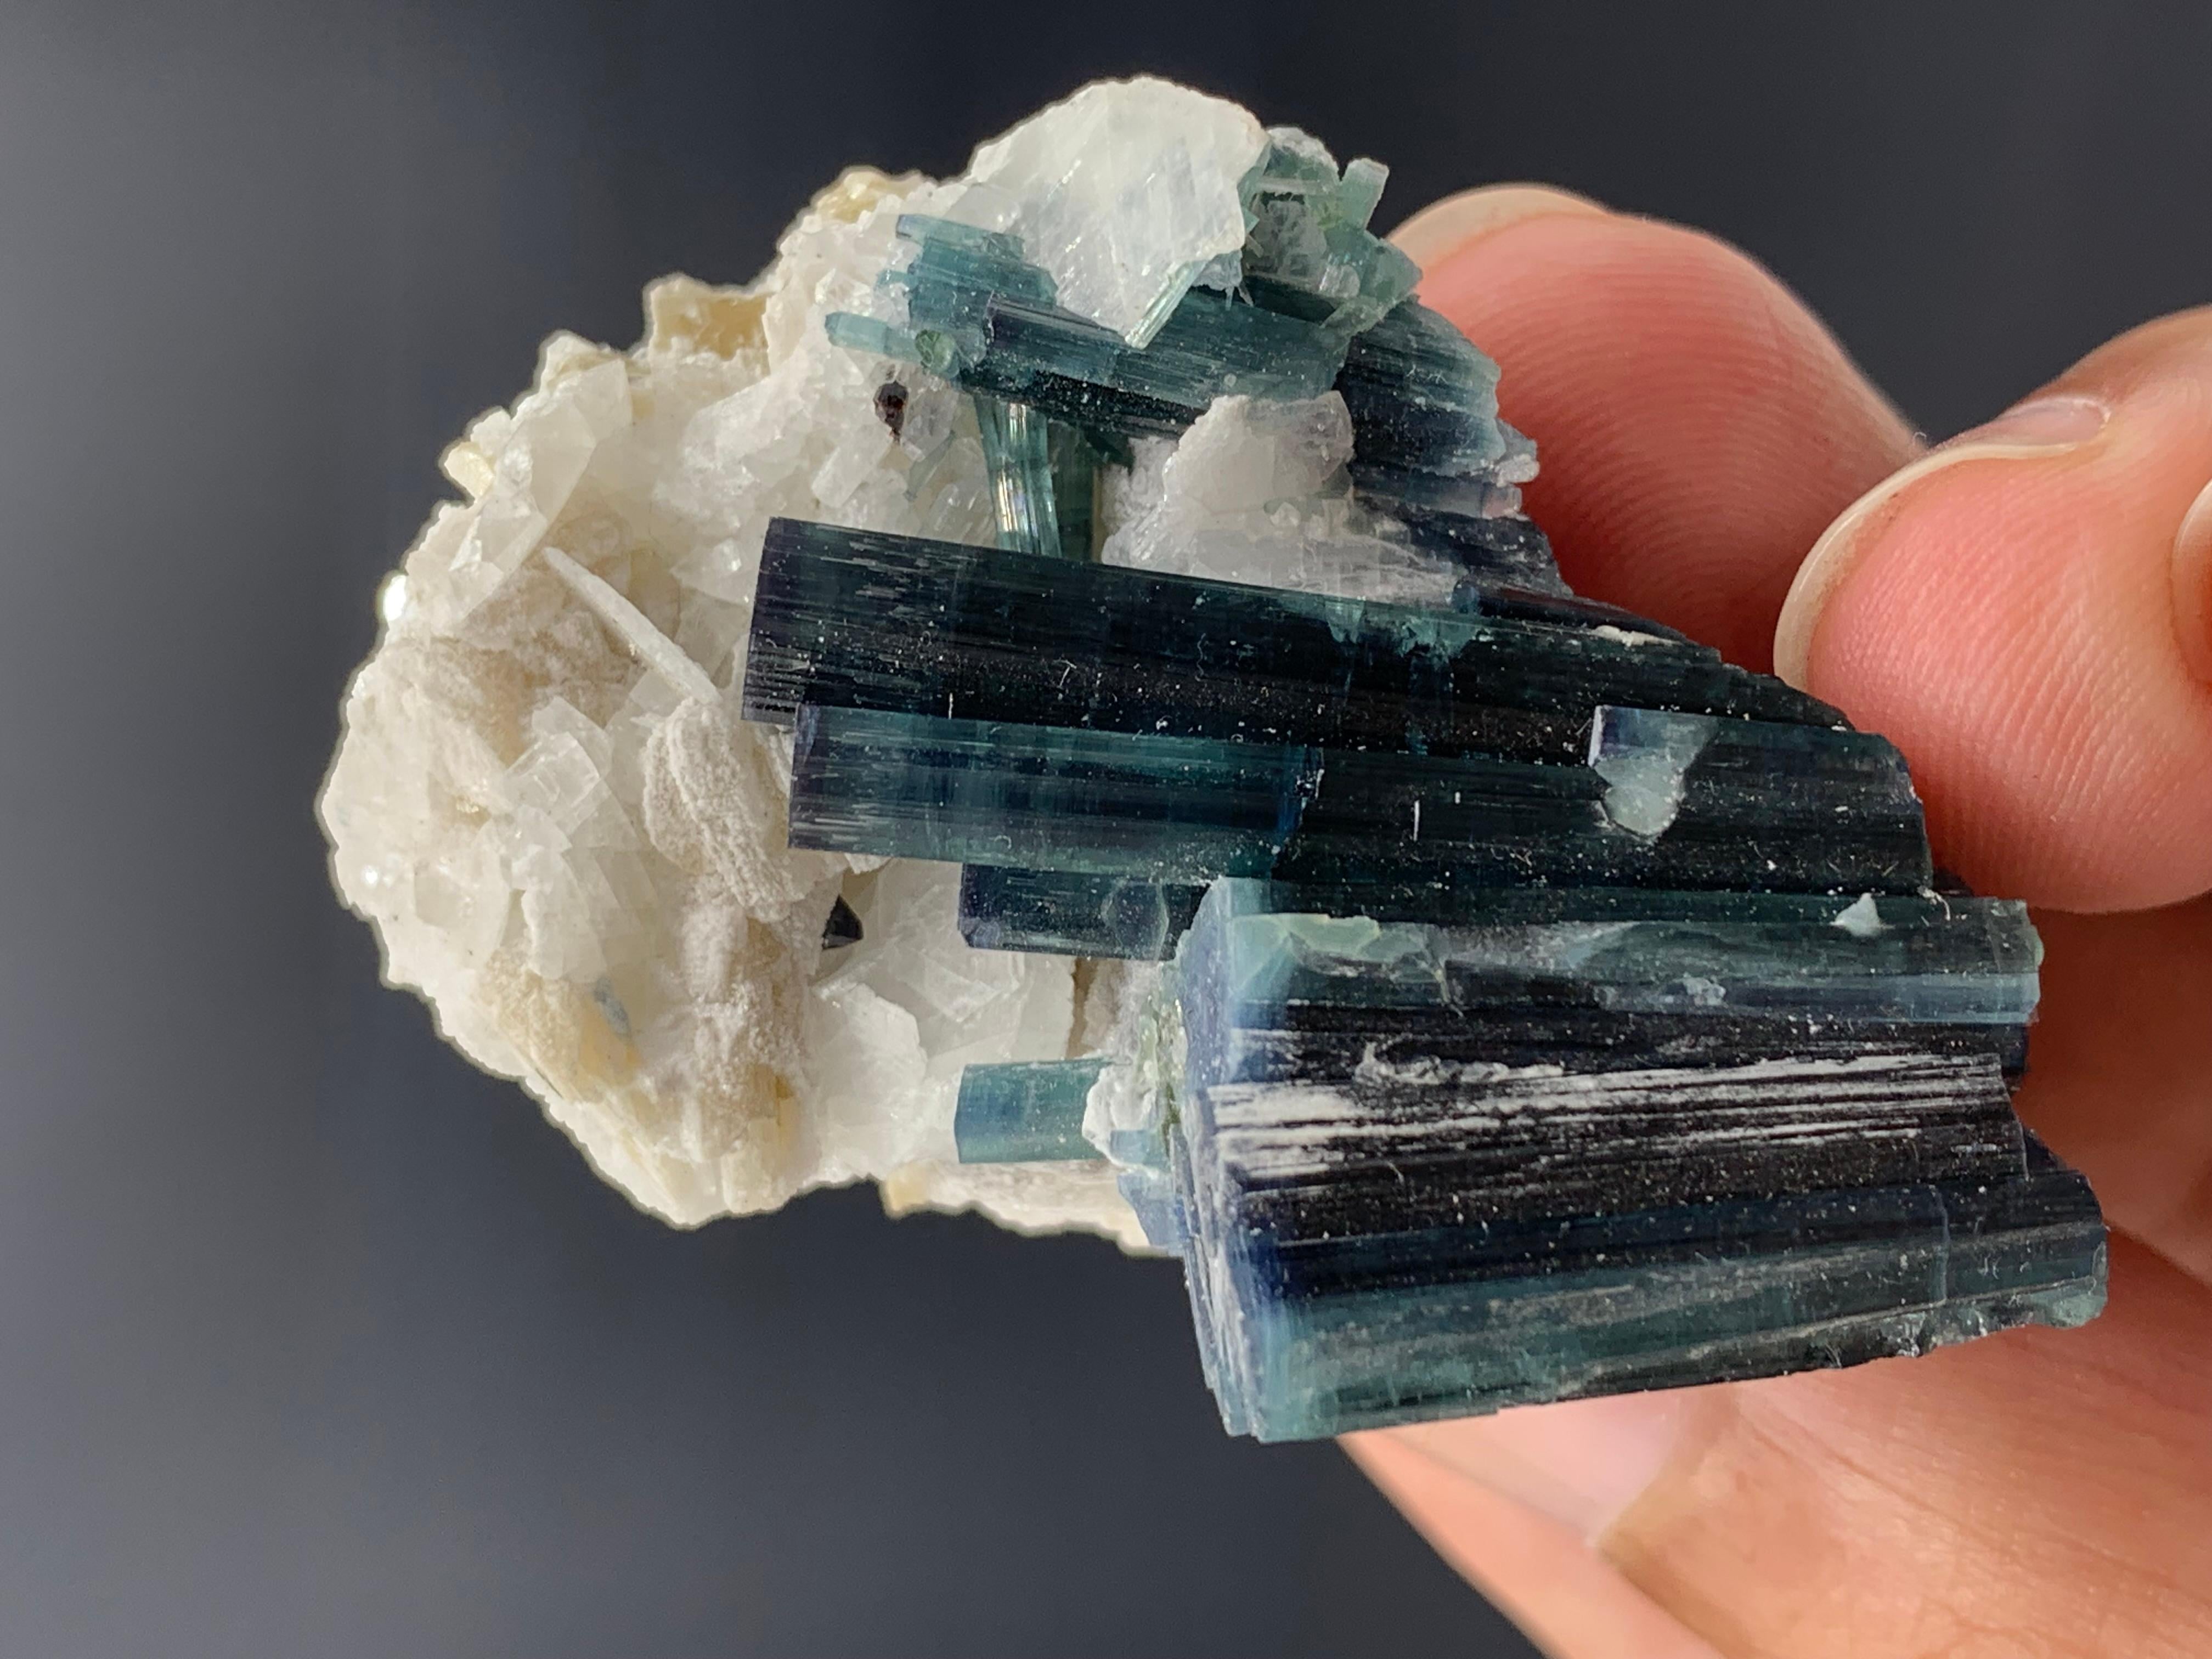 35.45 Adorable Indicolite Blue Tourmaline Specimen From Kunar, Afghanistan 
Weight: 35.45 Gram
Dimension: 4.6 x 3.6 x 2.8 Cm 
Origin: Kunar, Afghanistan 

Tourmaline is a crystalline silicate mineral group in which boron is compounded with elements